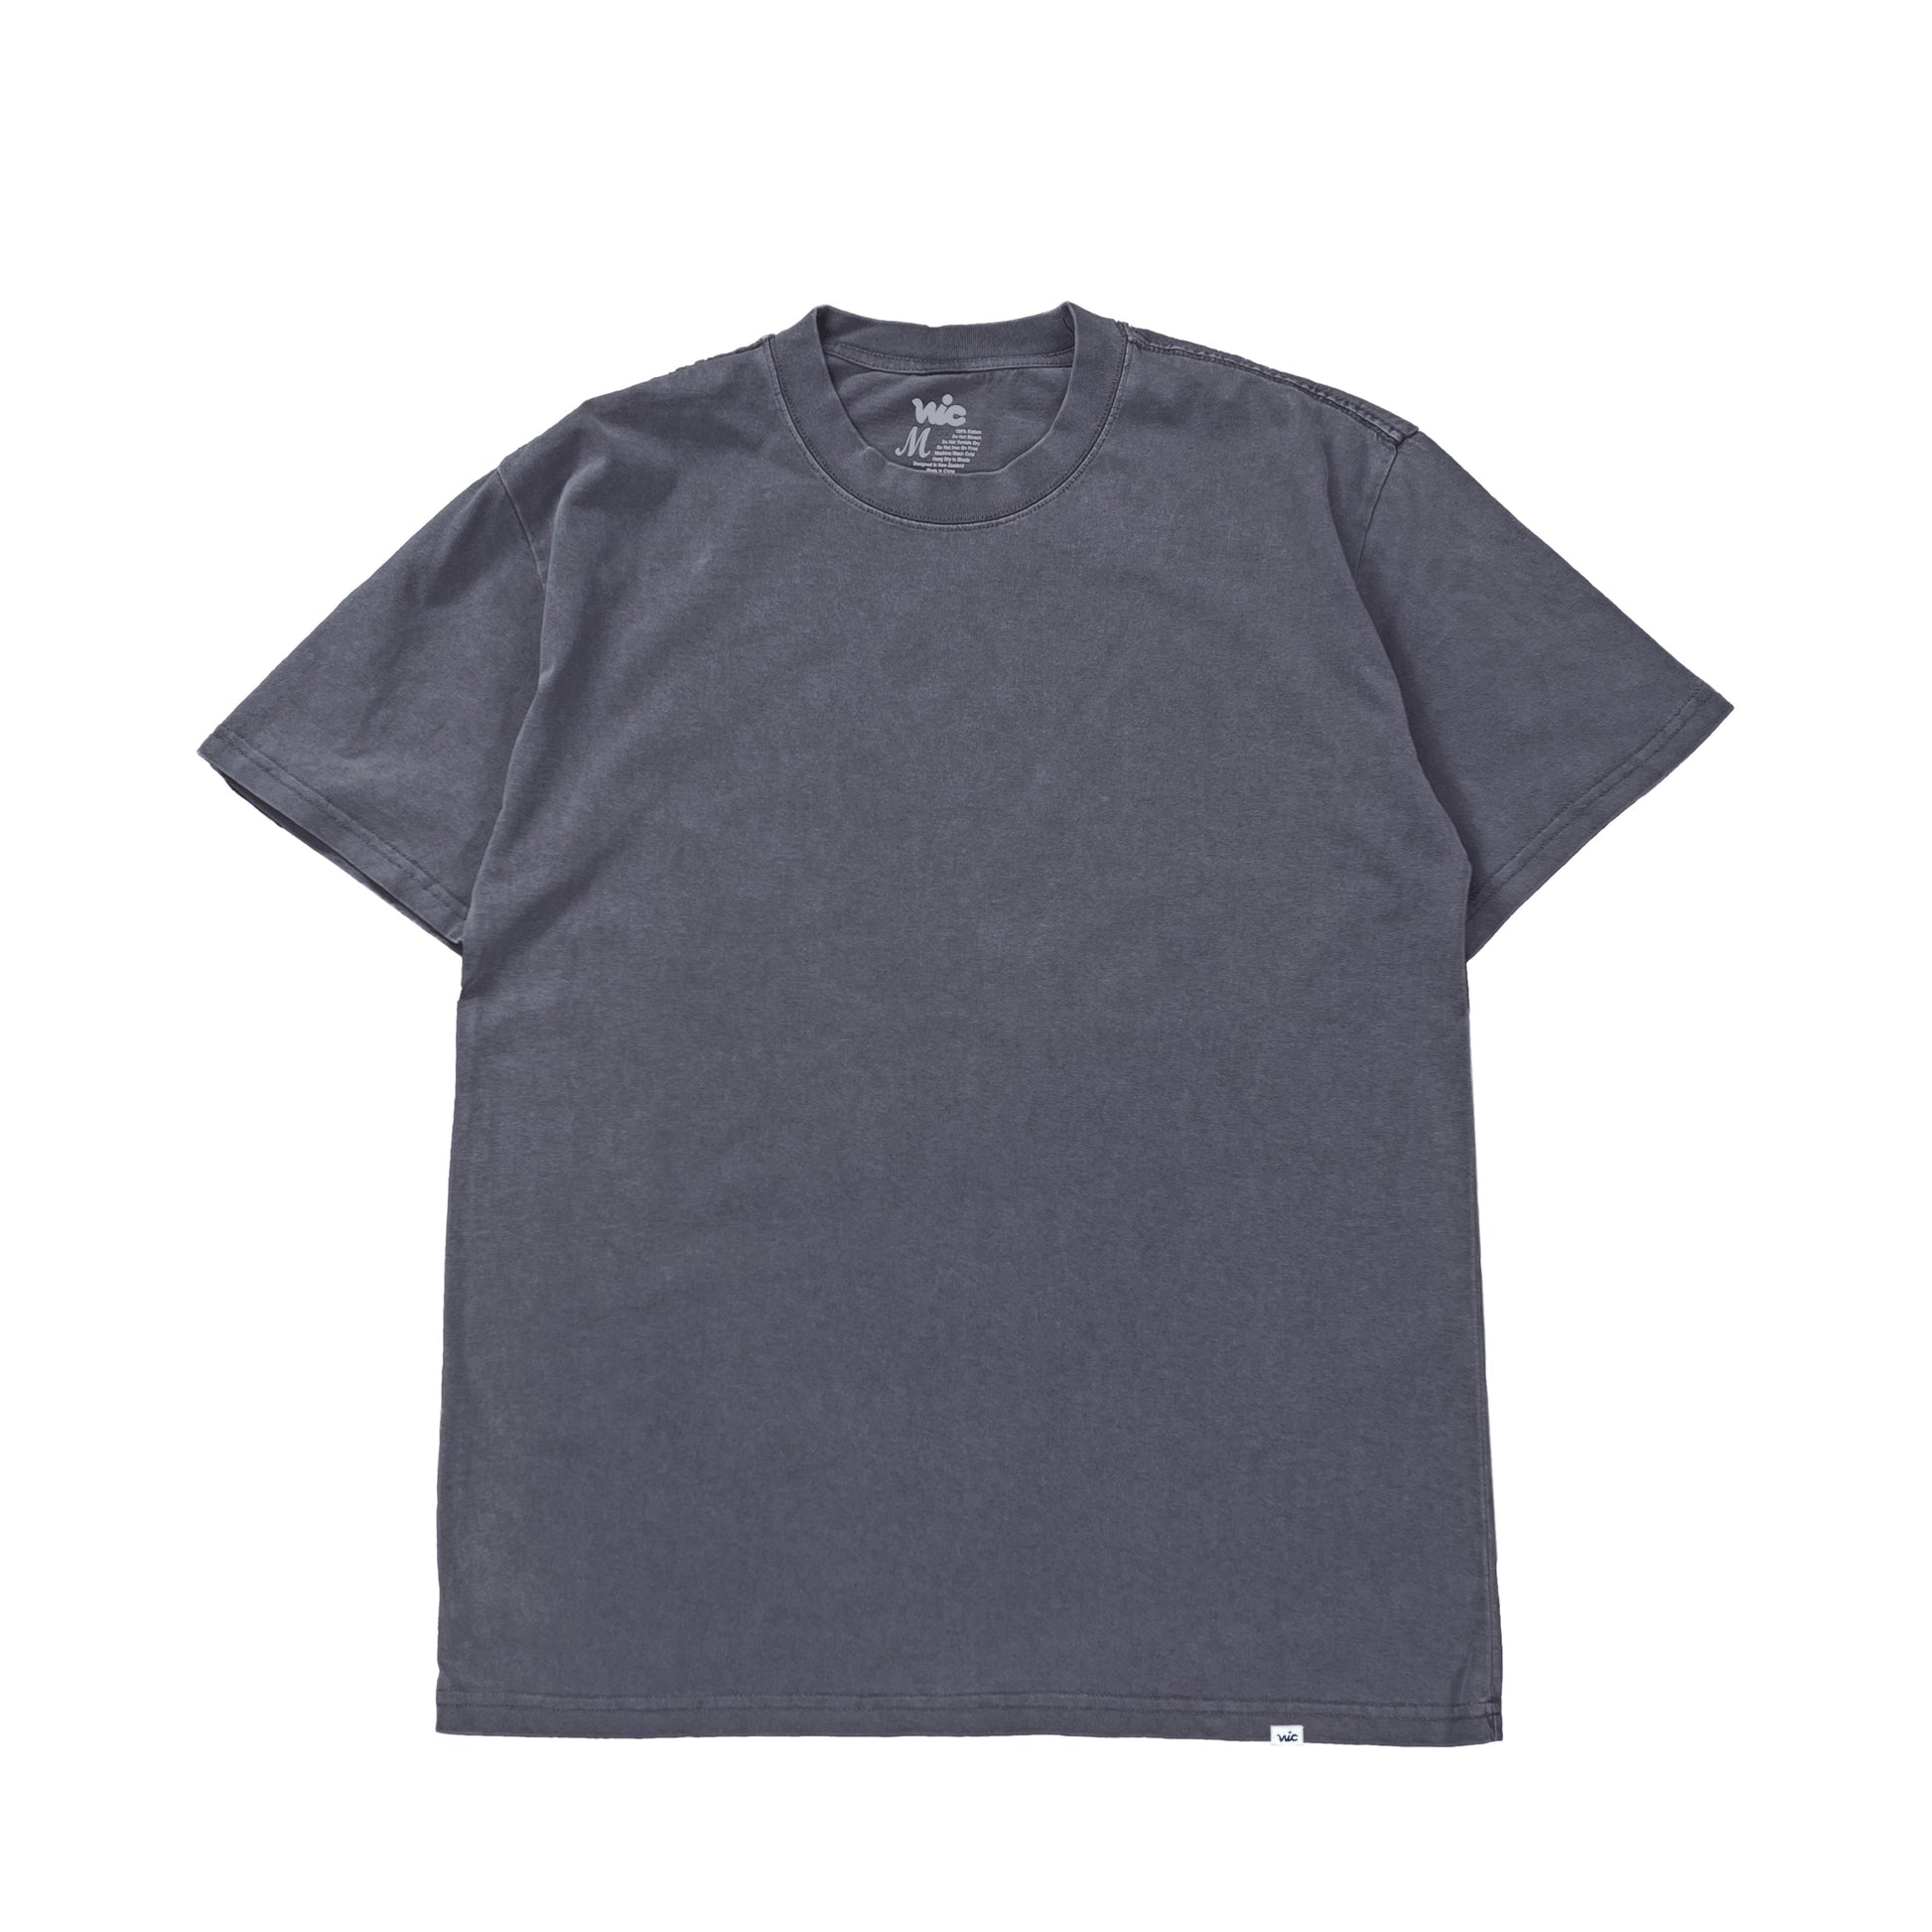 nspired by the oversized warm-up sweaters and T-Shirts from the 90s, The Box Fit Tee is an essential the offers a wider, baggier fit, and cut from 100% smooth cotton jersey for that premium quality feel. As this silhouette is very oversized and loose-fitting, we recommend sizing down to achieve the perfect Box Fit style. Faded indigo, garment dyed.